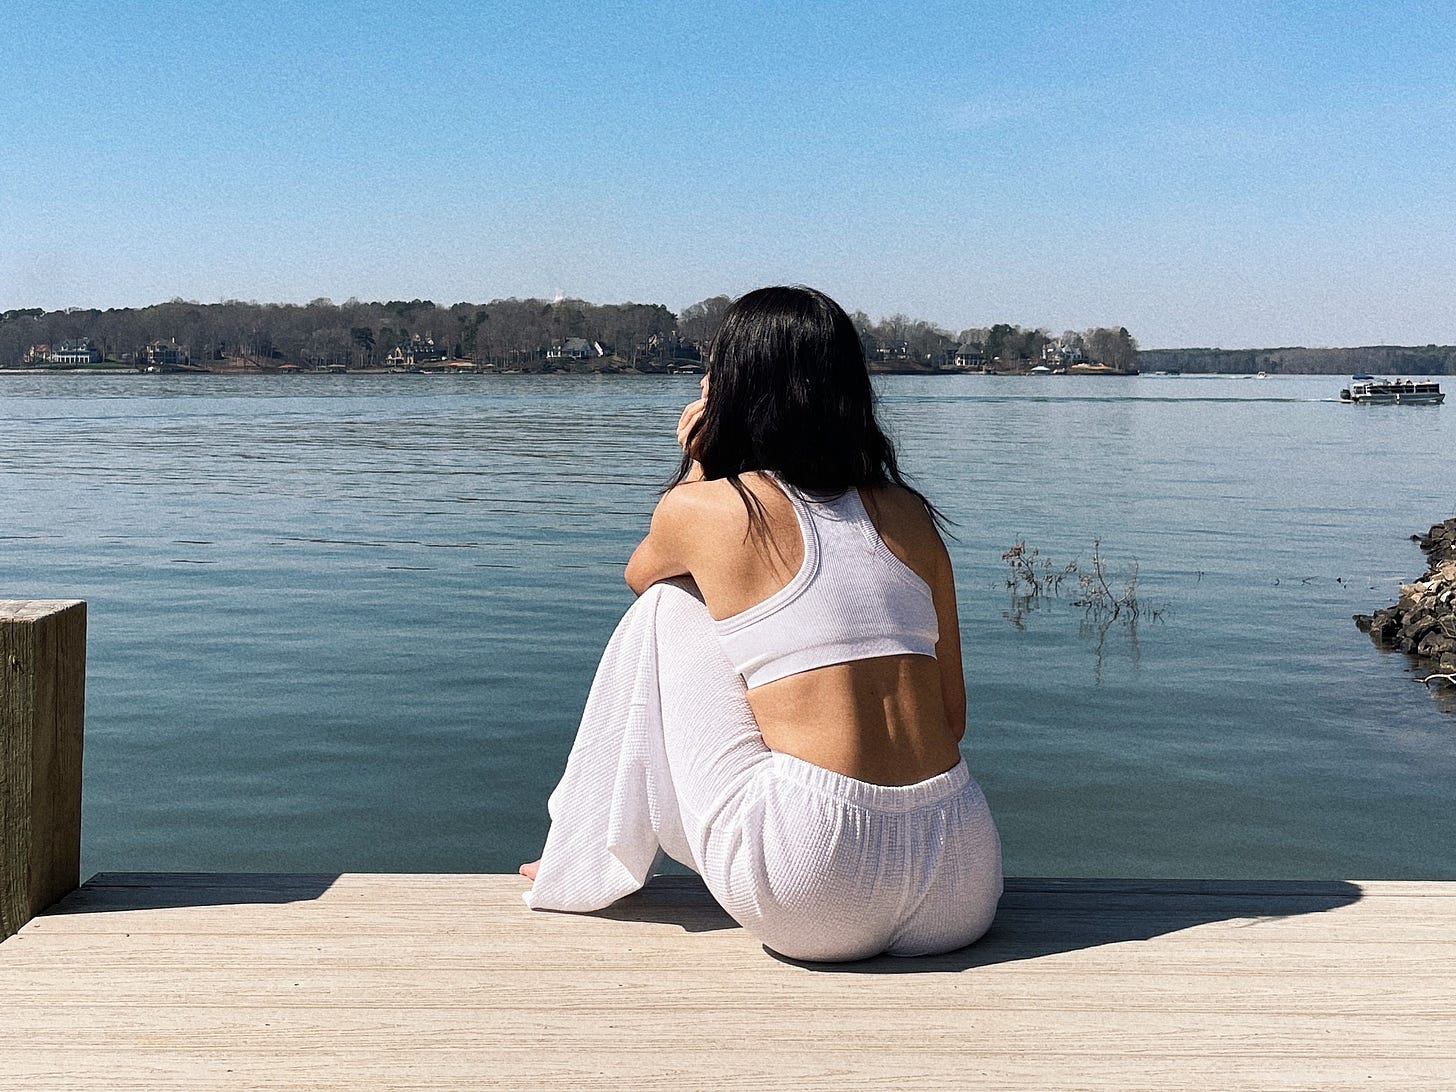 Woman sat on dock looking out over a lake